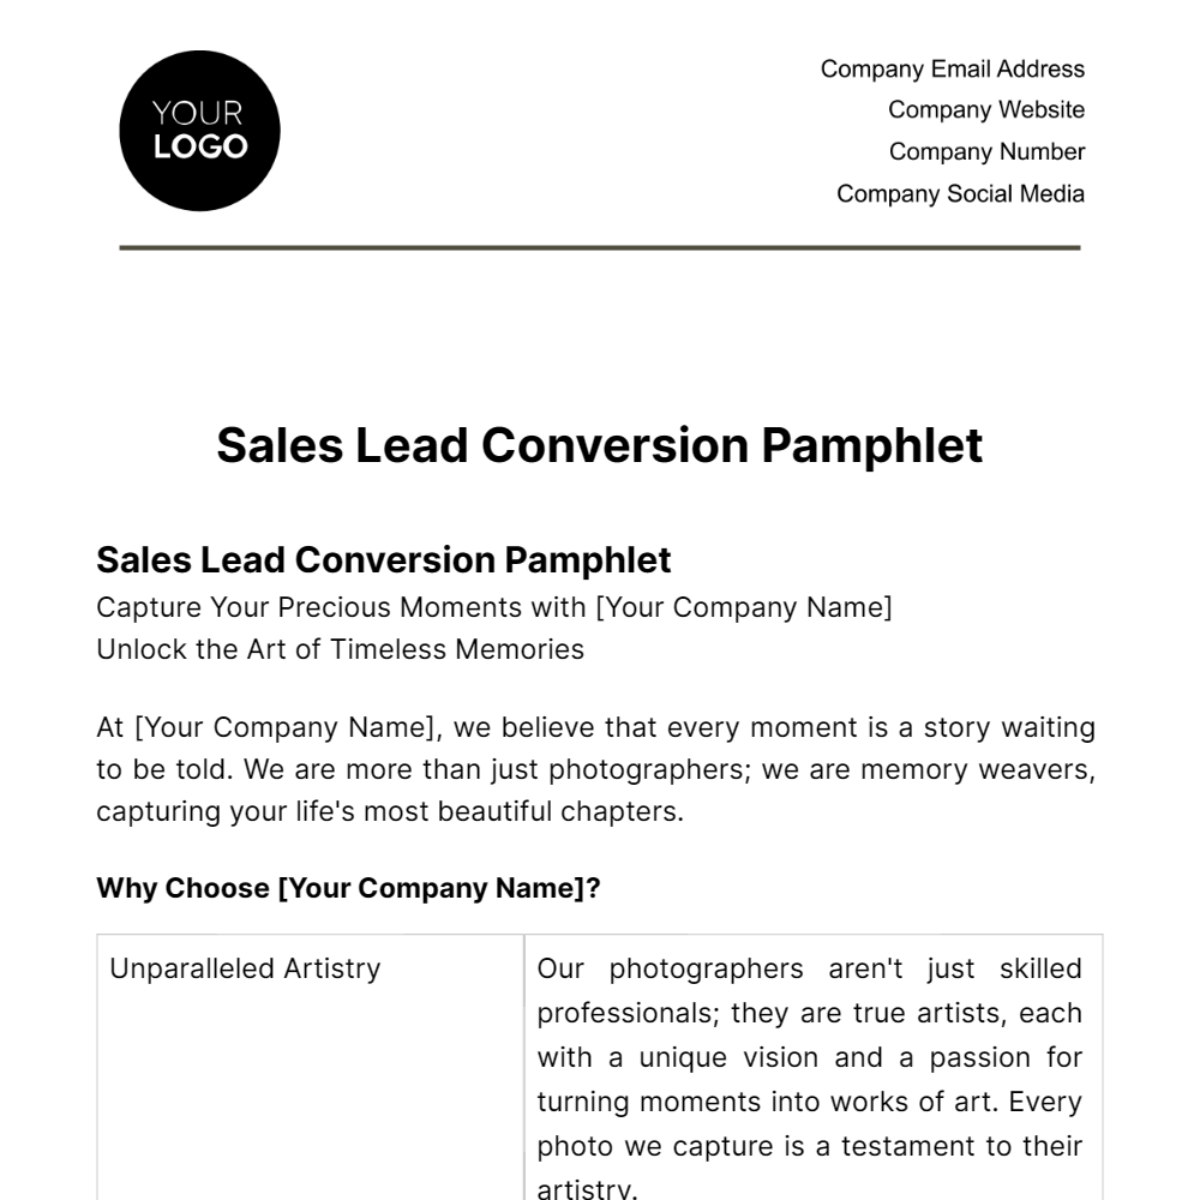 Free Sales Lead Conversion Pamphlet Template